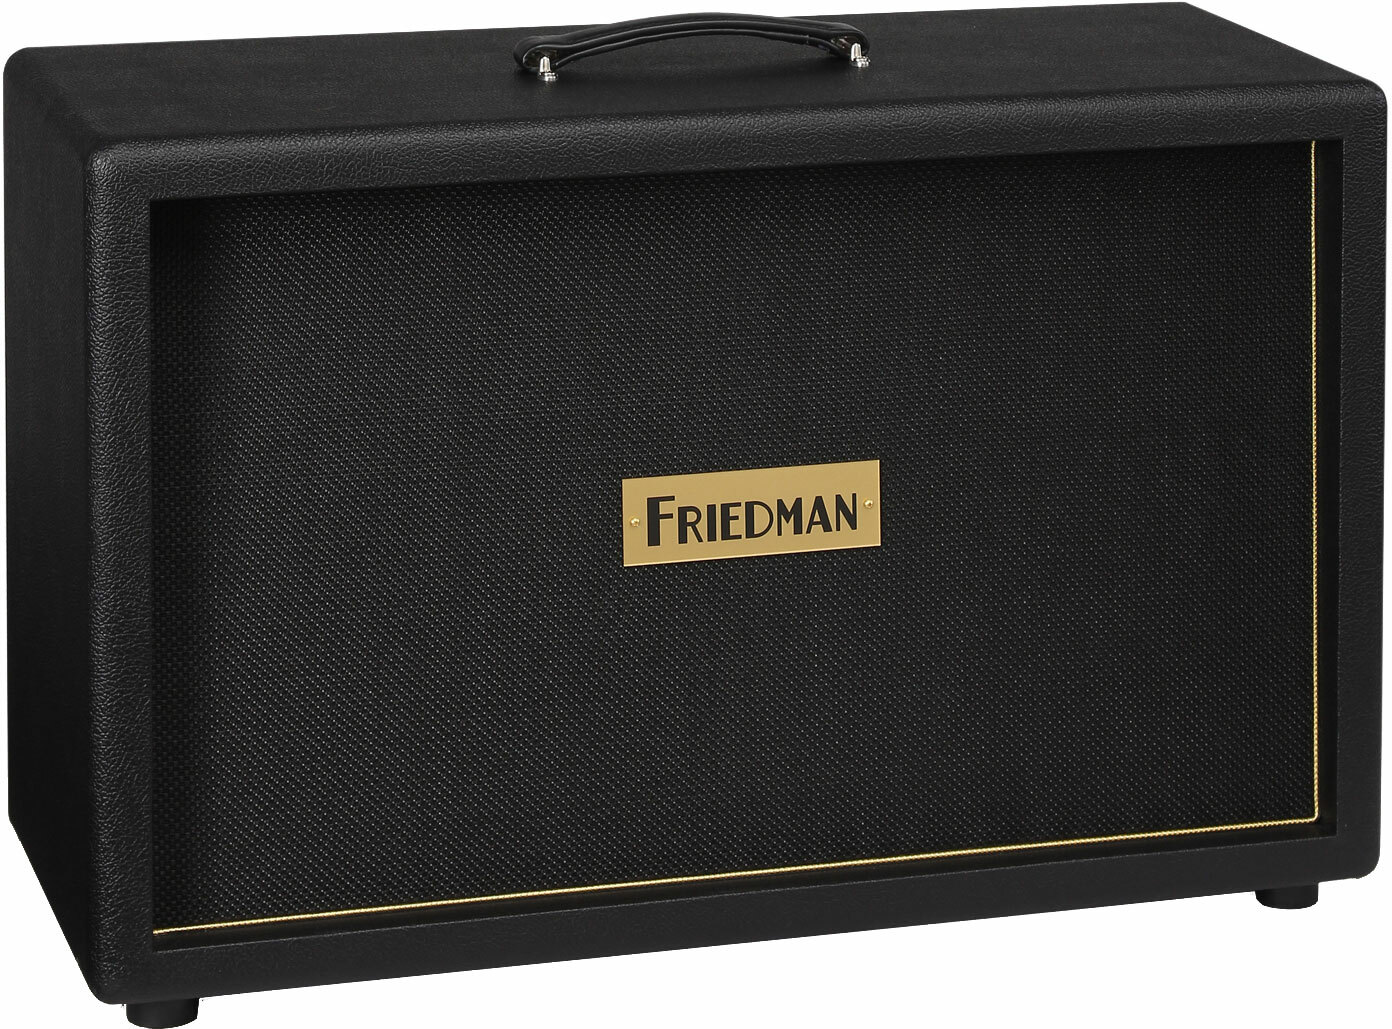 Friedman Amplification Ext-212 Cabinet 2x12 120w 8-ohms - Electric guitar amp cabinet - Main picture